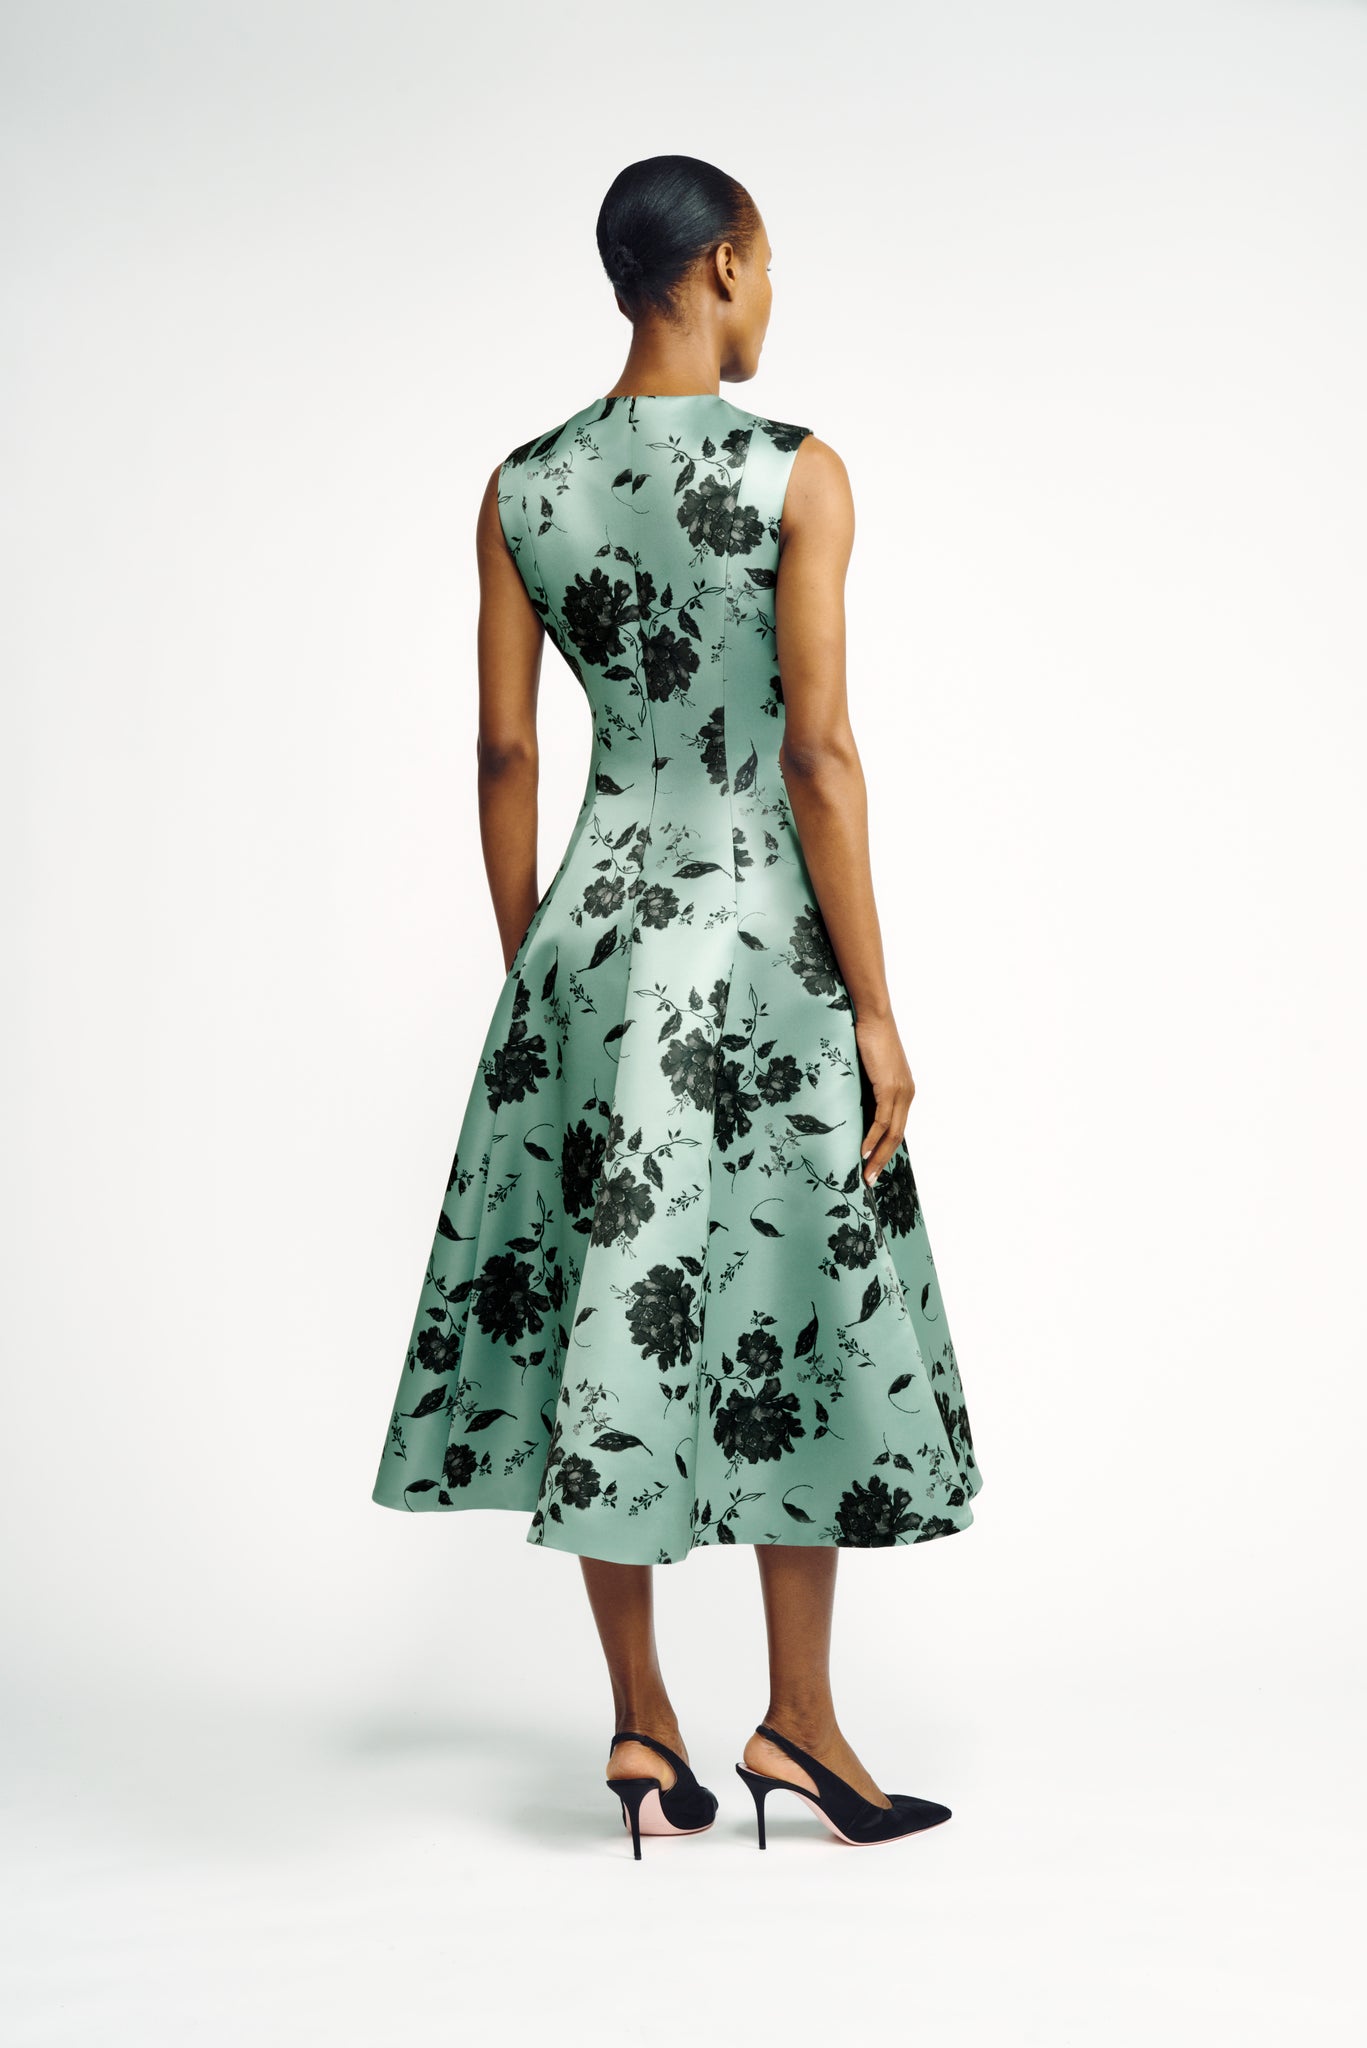 Mara Dress | Pistachio and Black Floral Printed Sleeveless Fit-and-Flare Dress | Emilia Wickstead